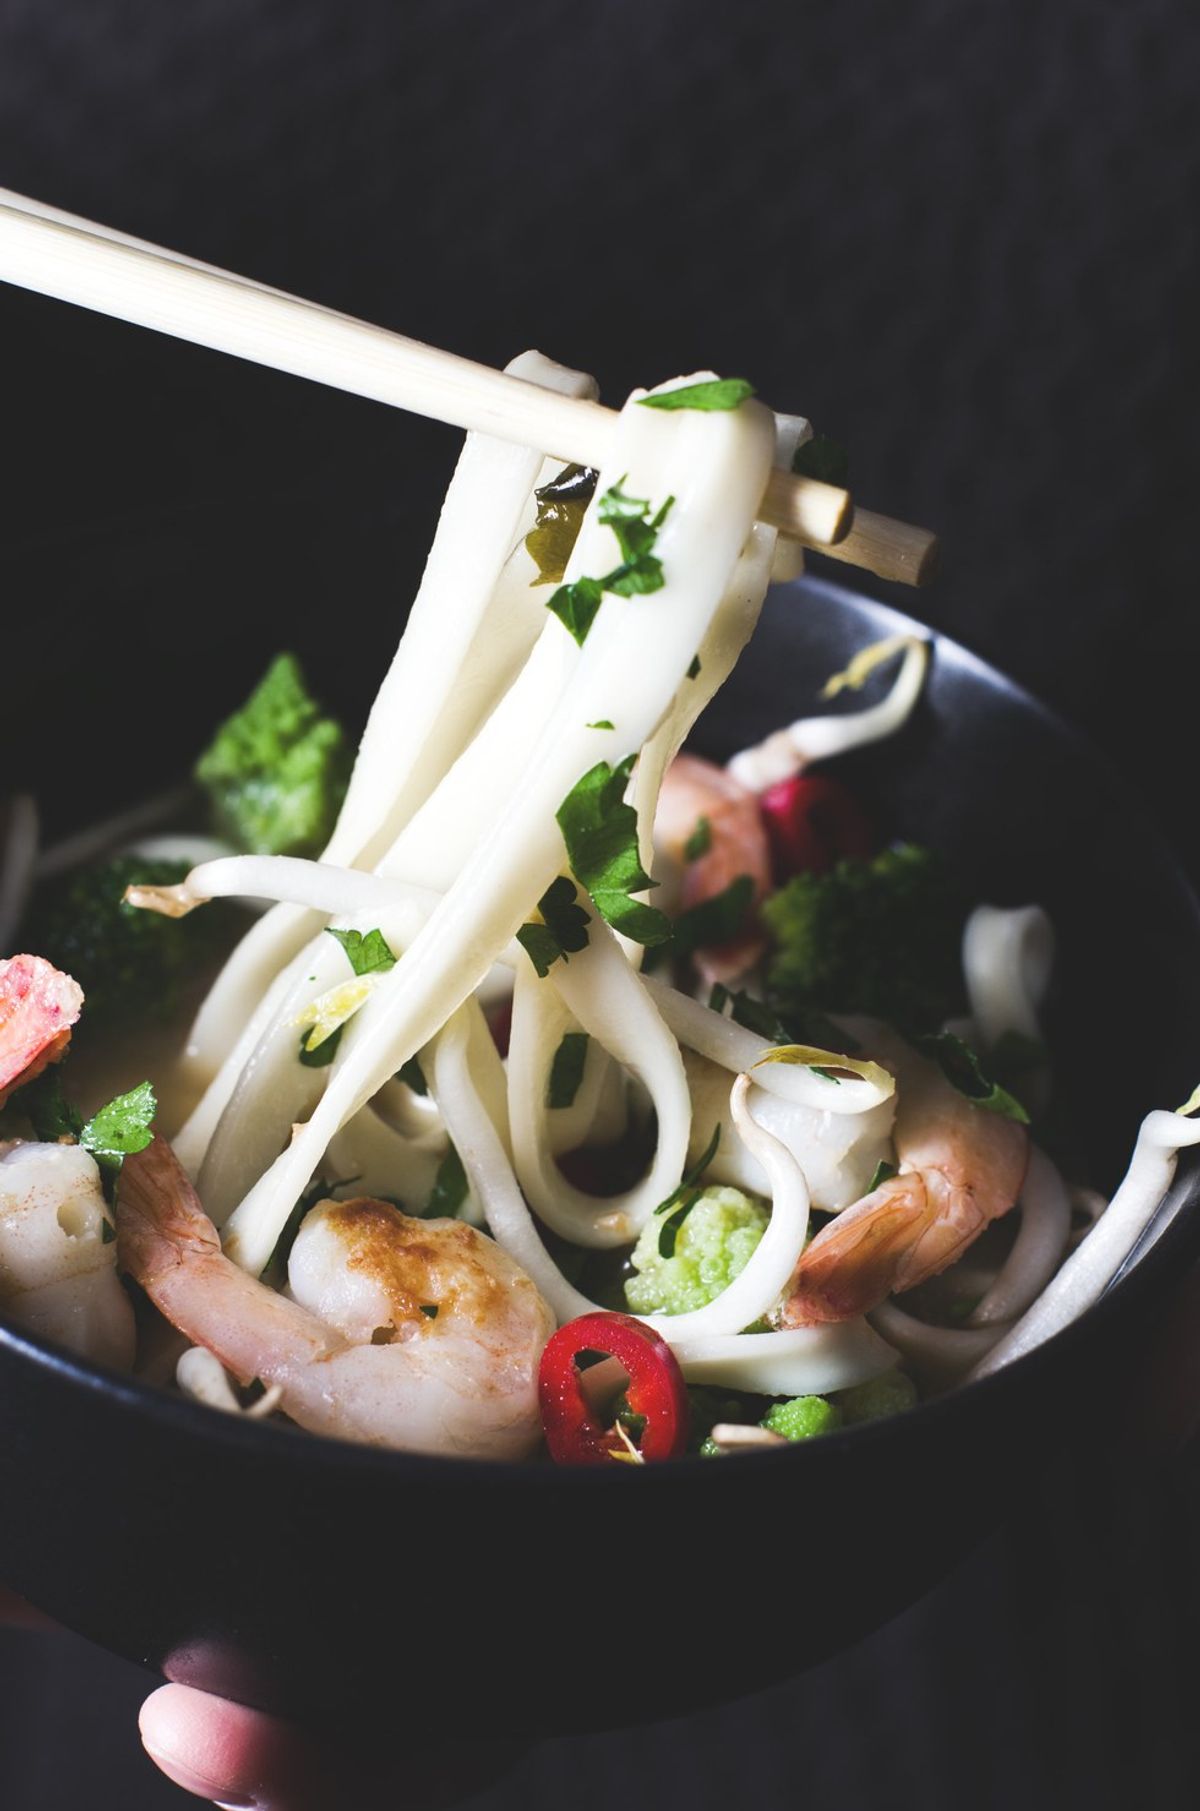 10 Cool Asian Foods You've Never Tried